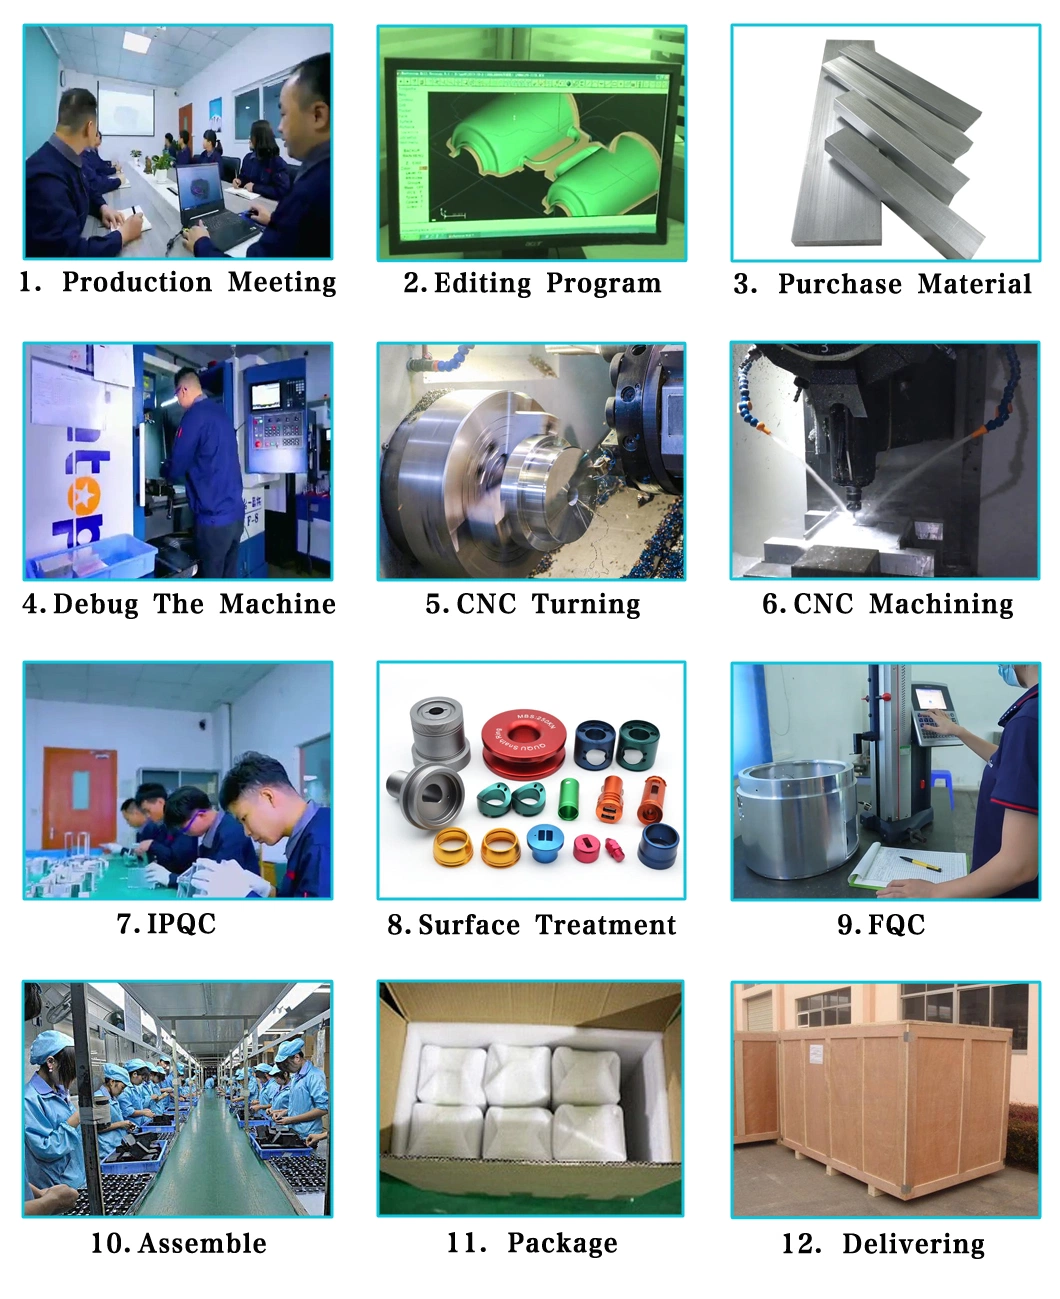 Vacuum Forming Processing of Structural Parts of Plastic and Metal Materials Part